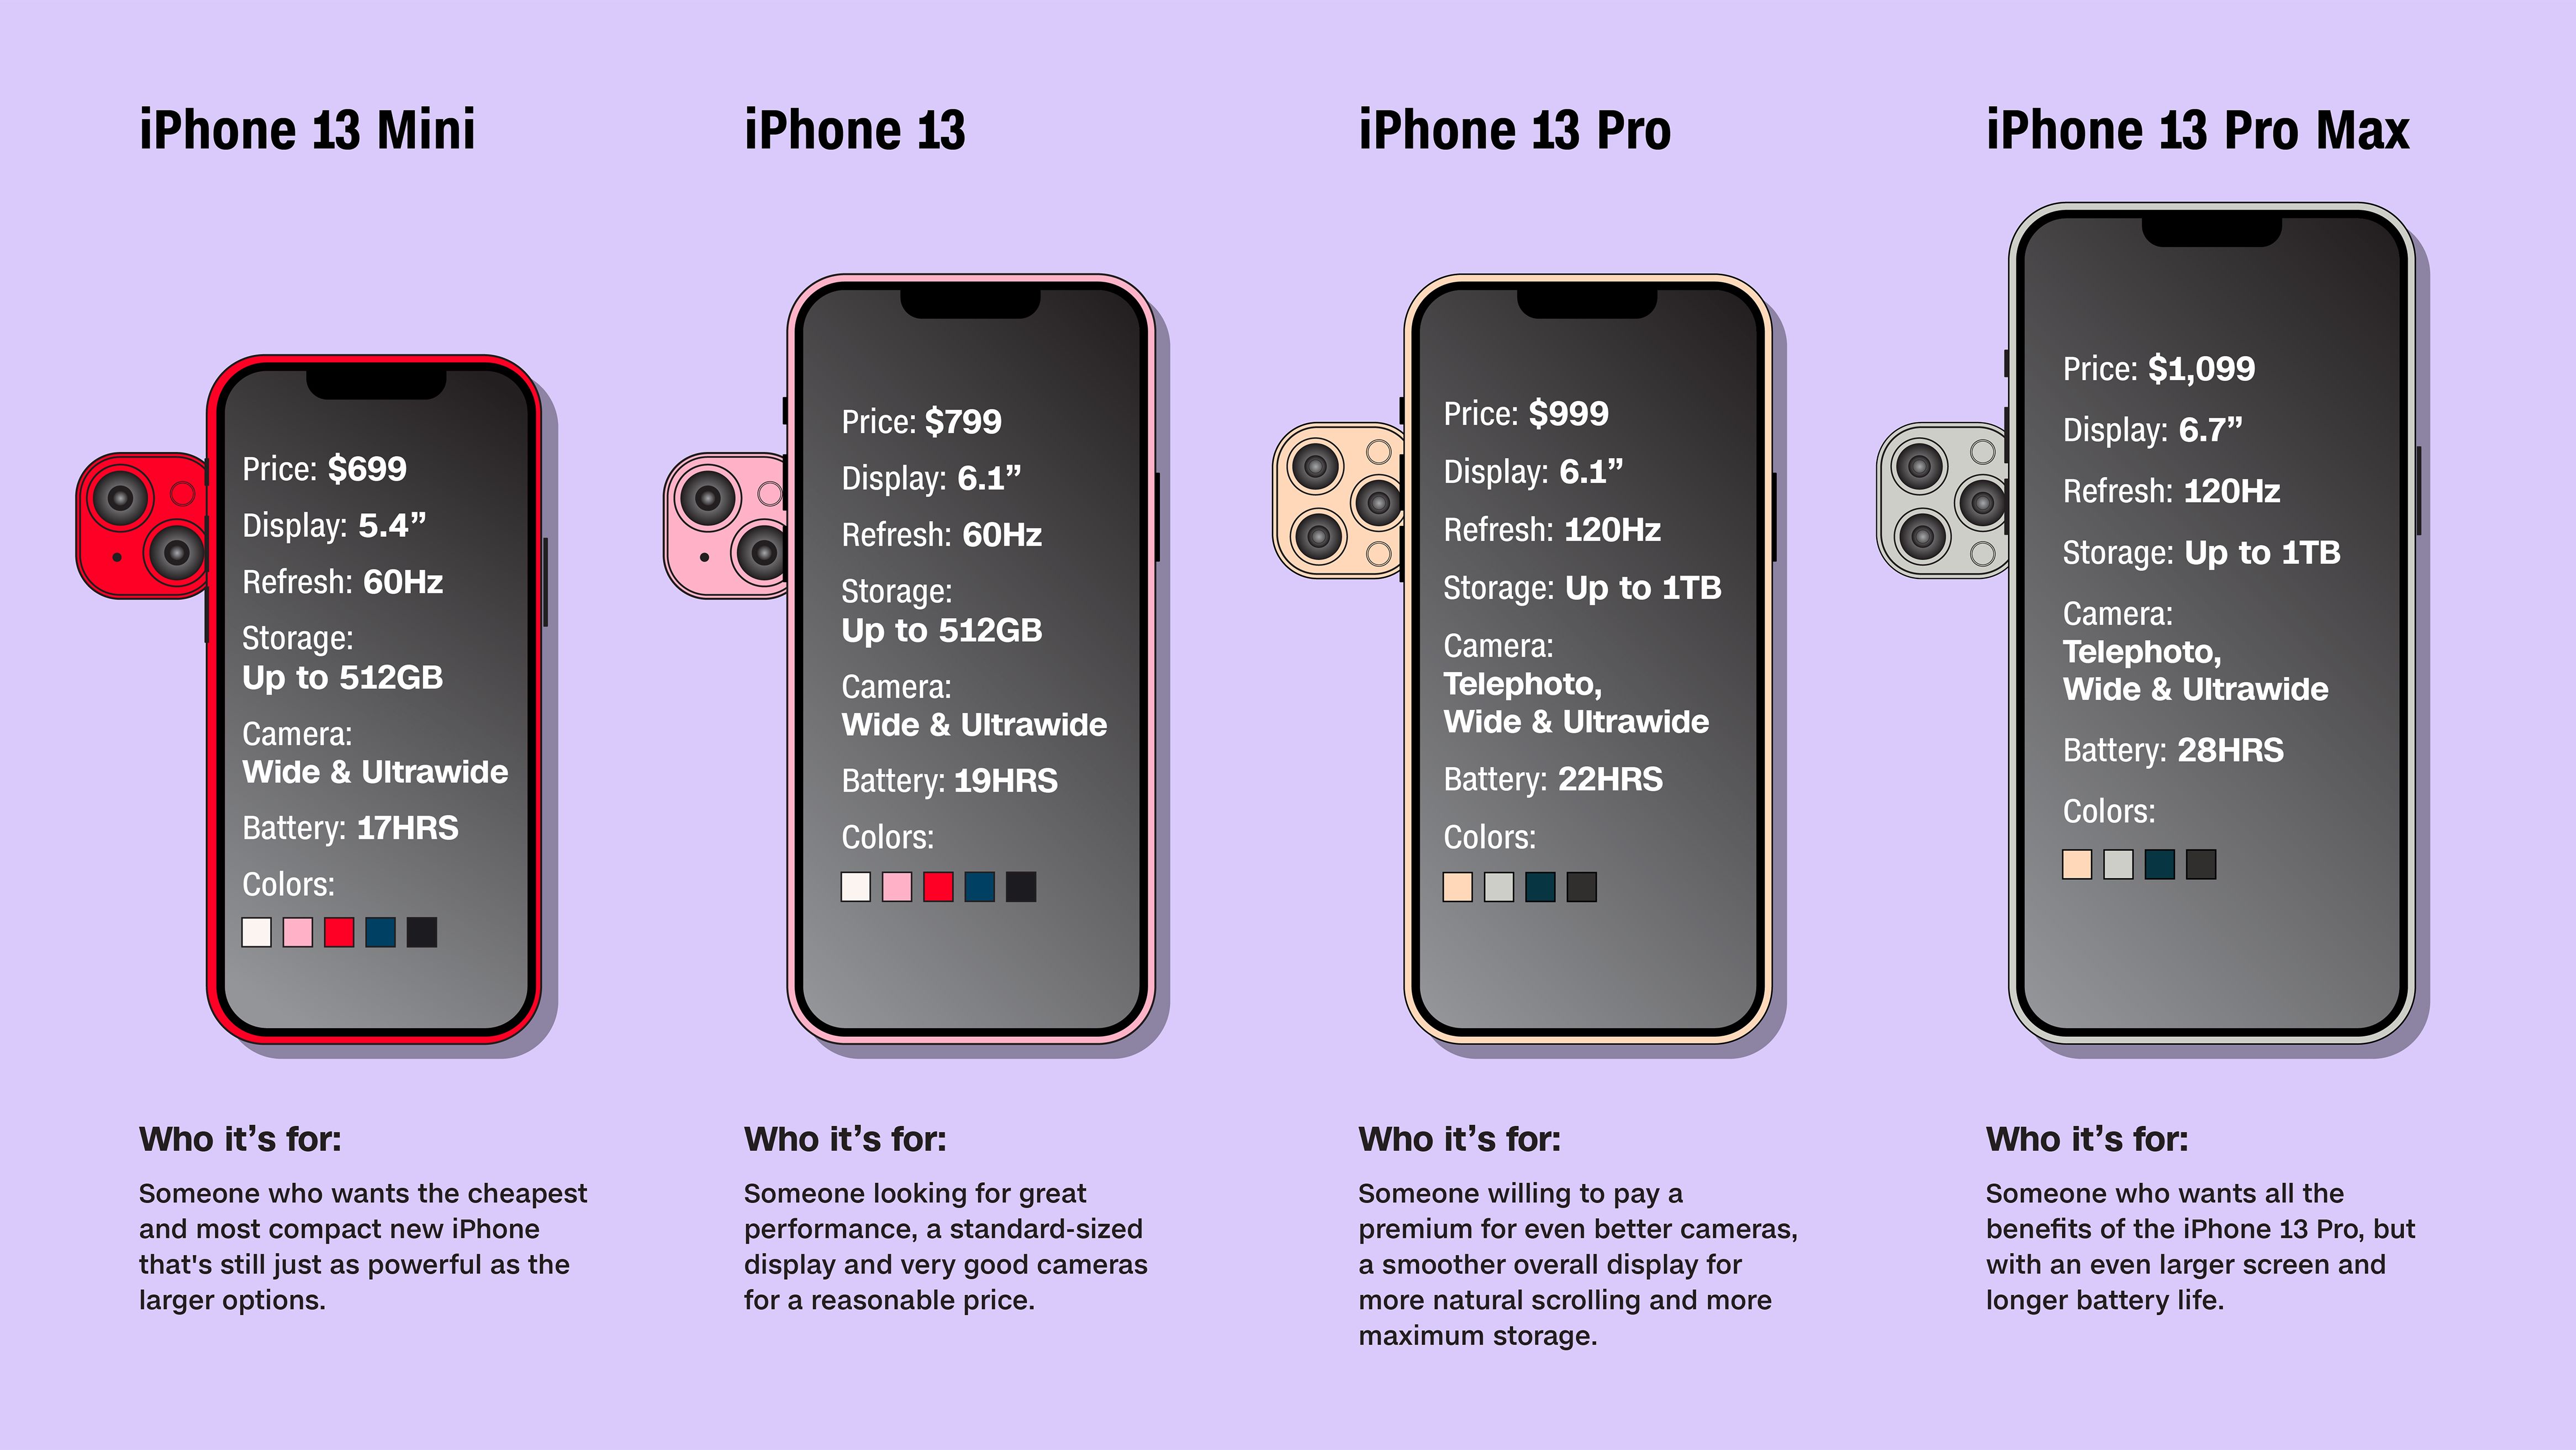 iPhone 13 and 13 Pro review: If you could have three wishes